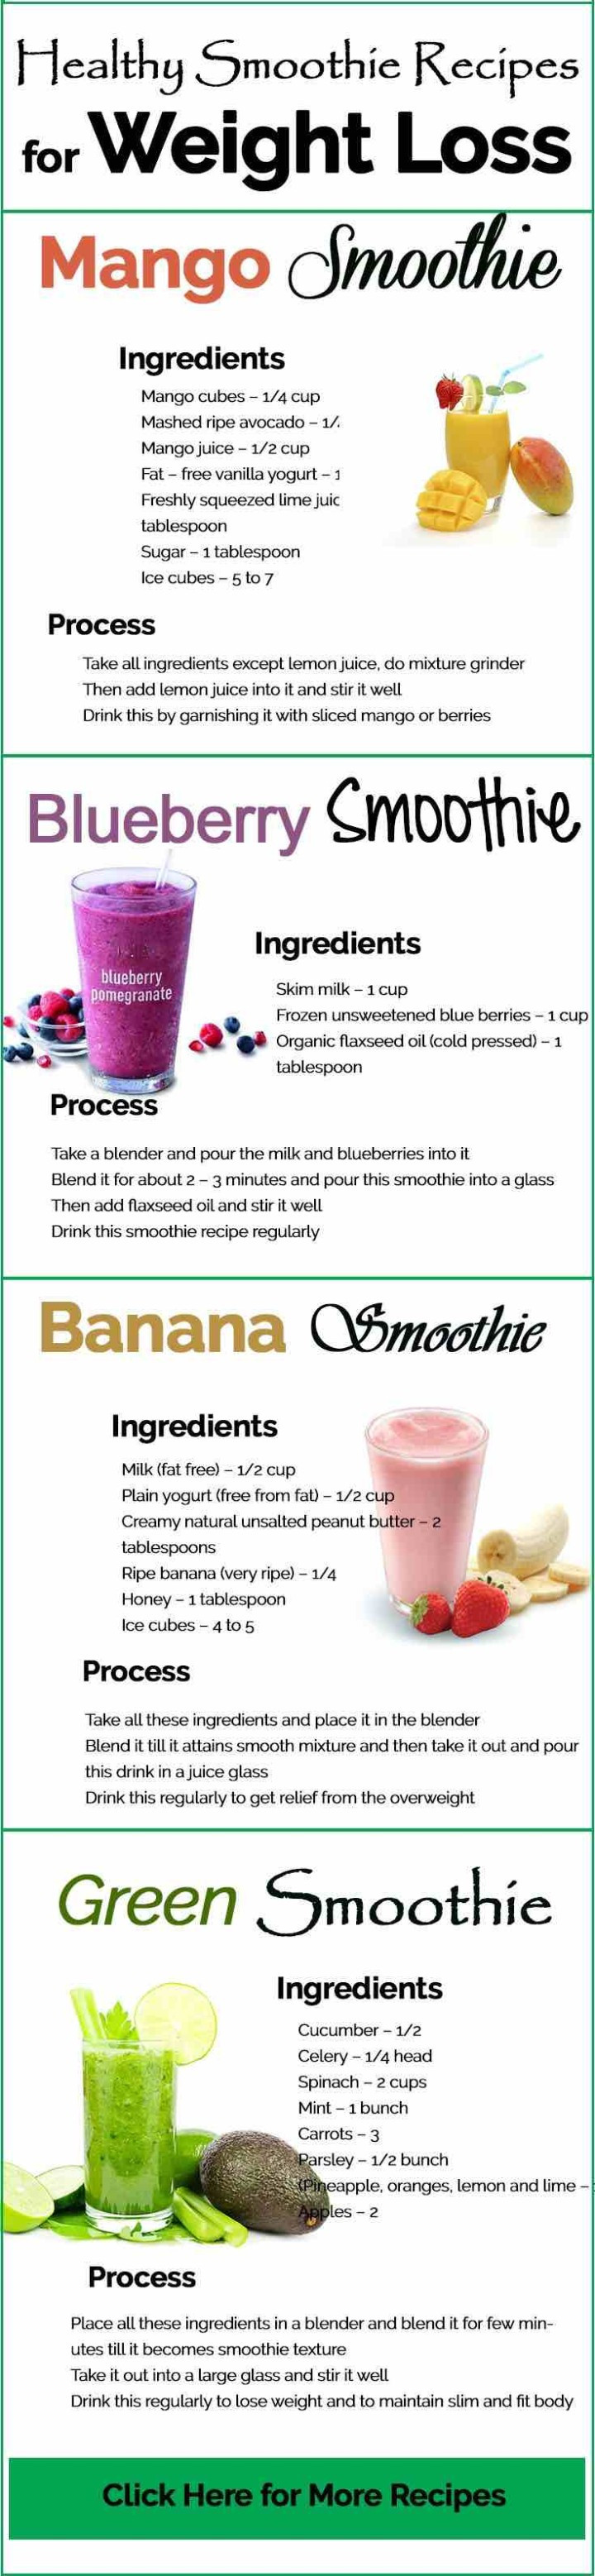 Nutritious Smoothies For Weight Loss
 Juicing Recipes for Detoxing and Weight Loss MODwedding